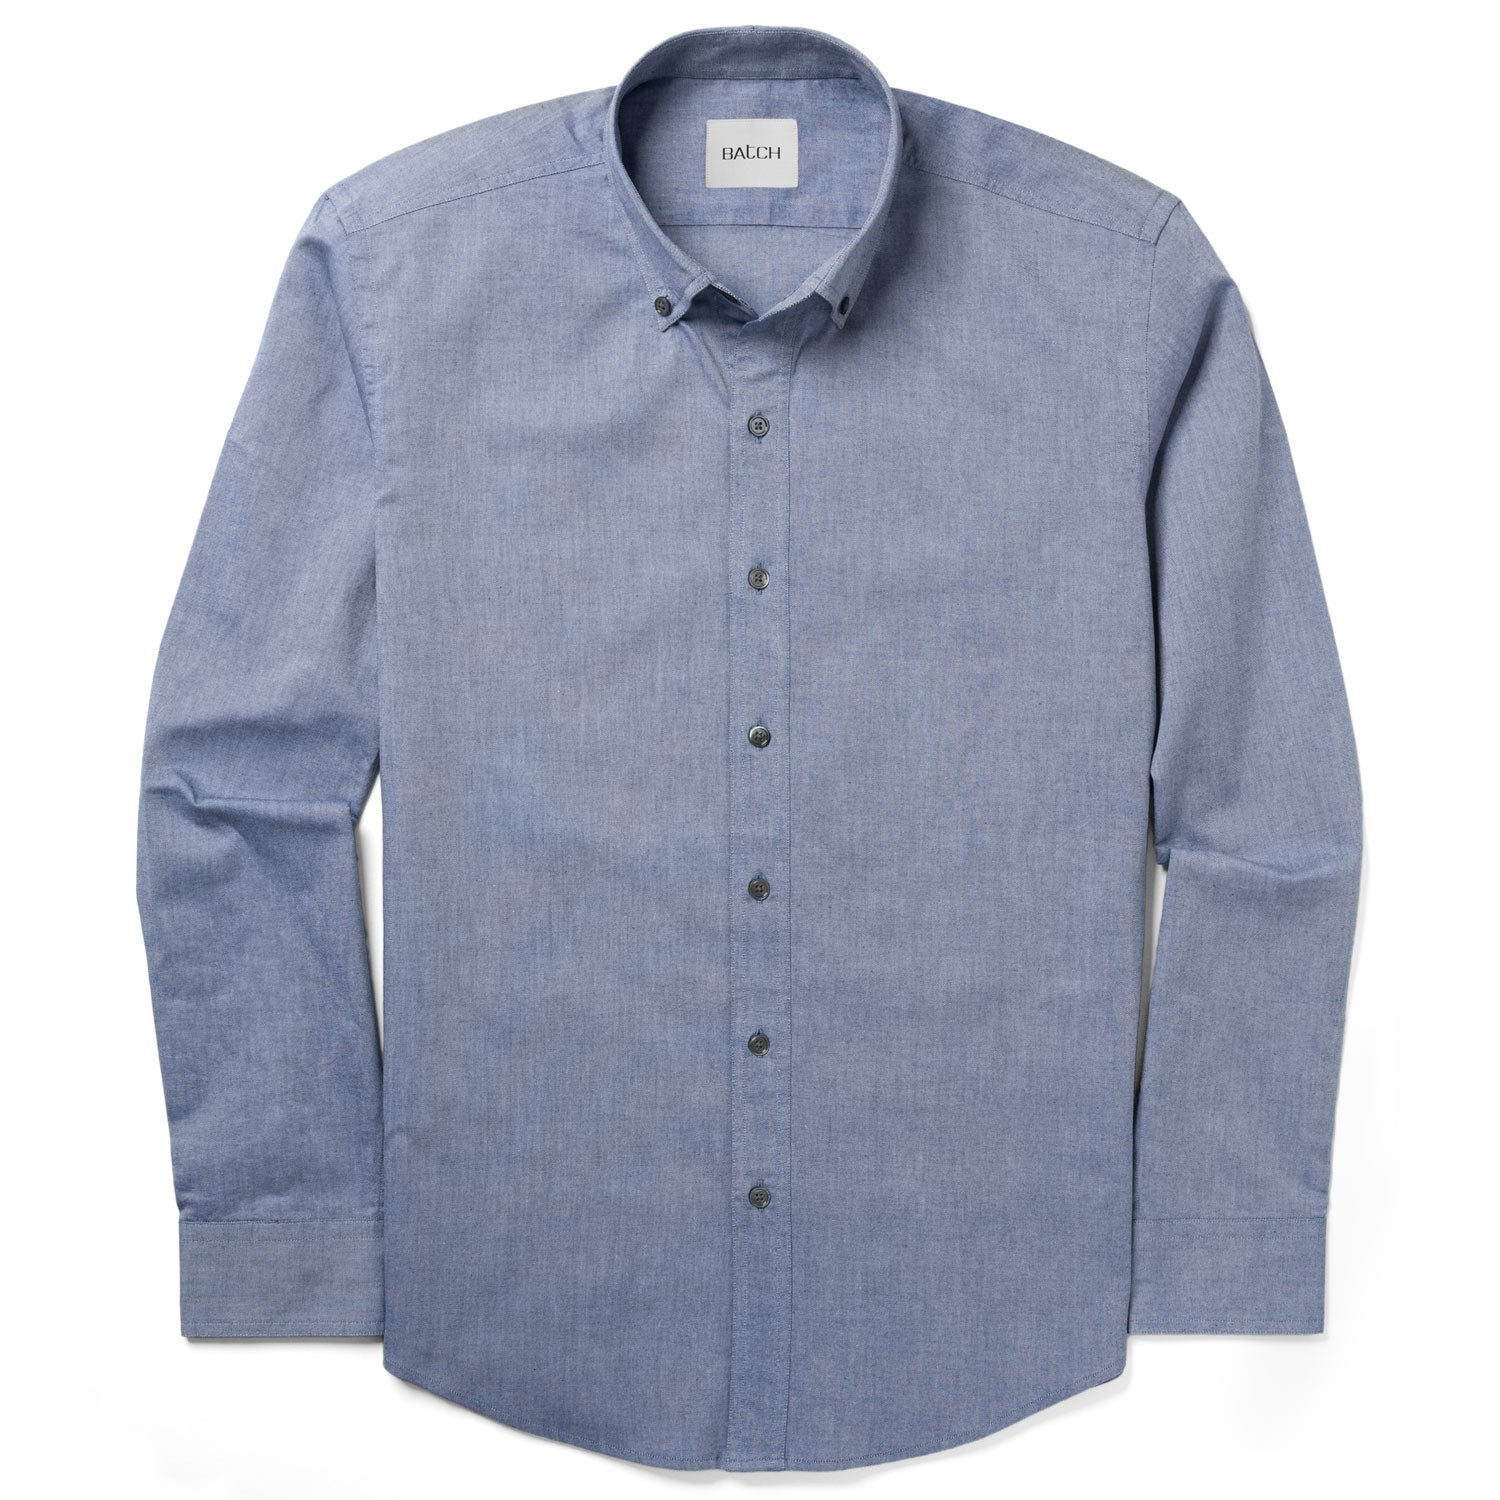 Essential Casual Shirt - Navy Blue Cotton Oxford